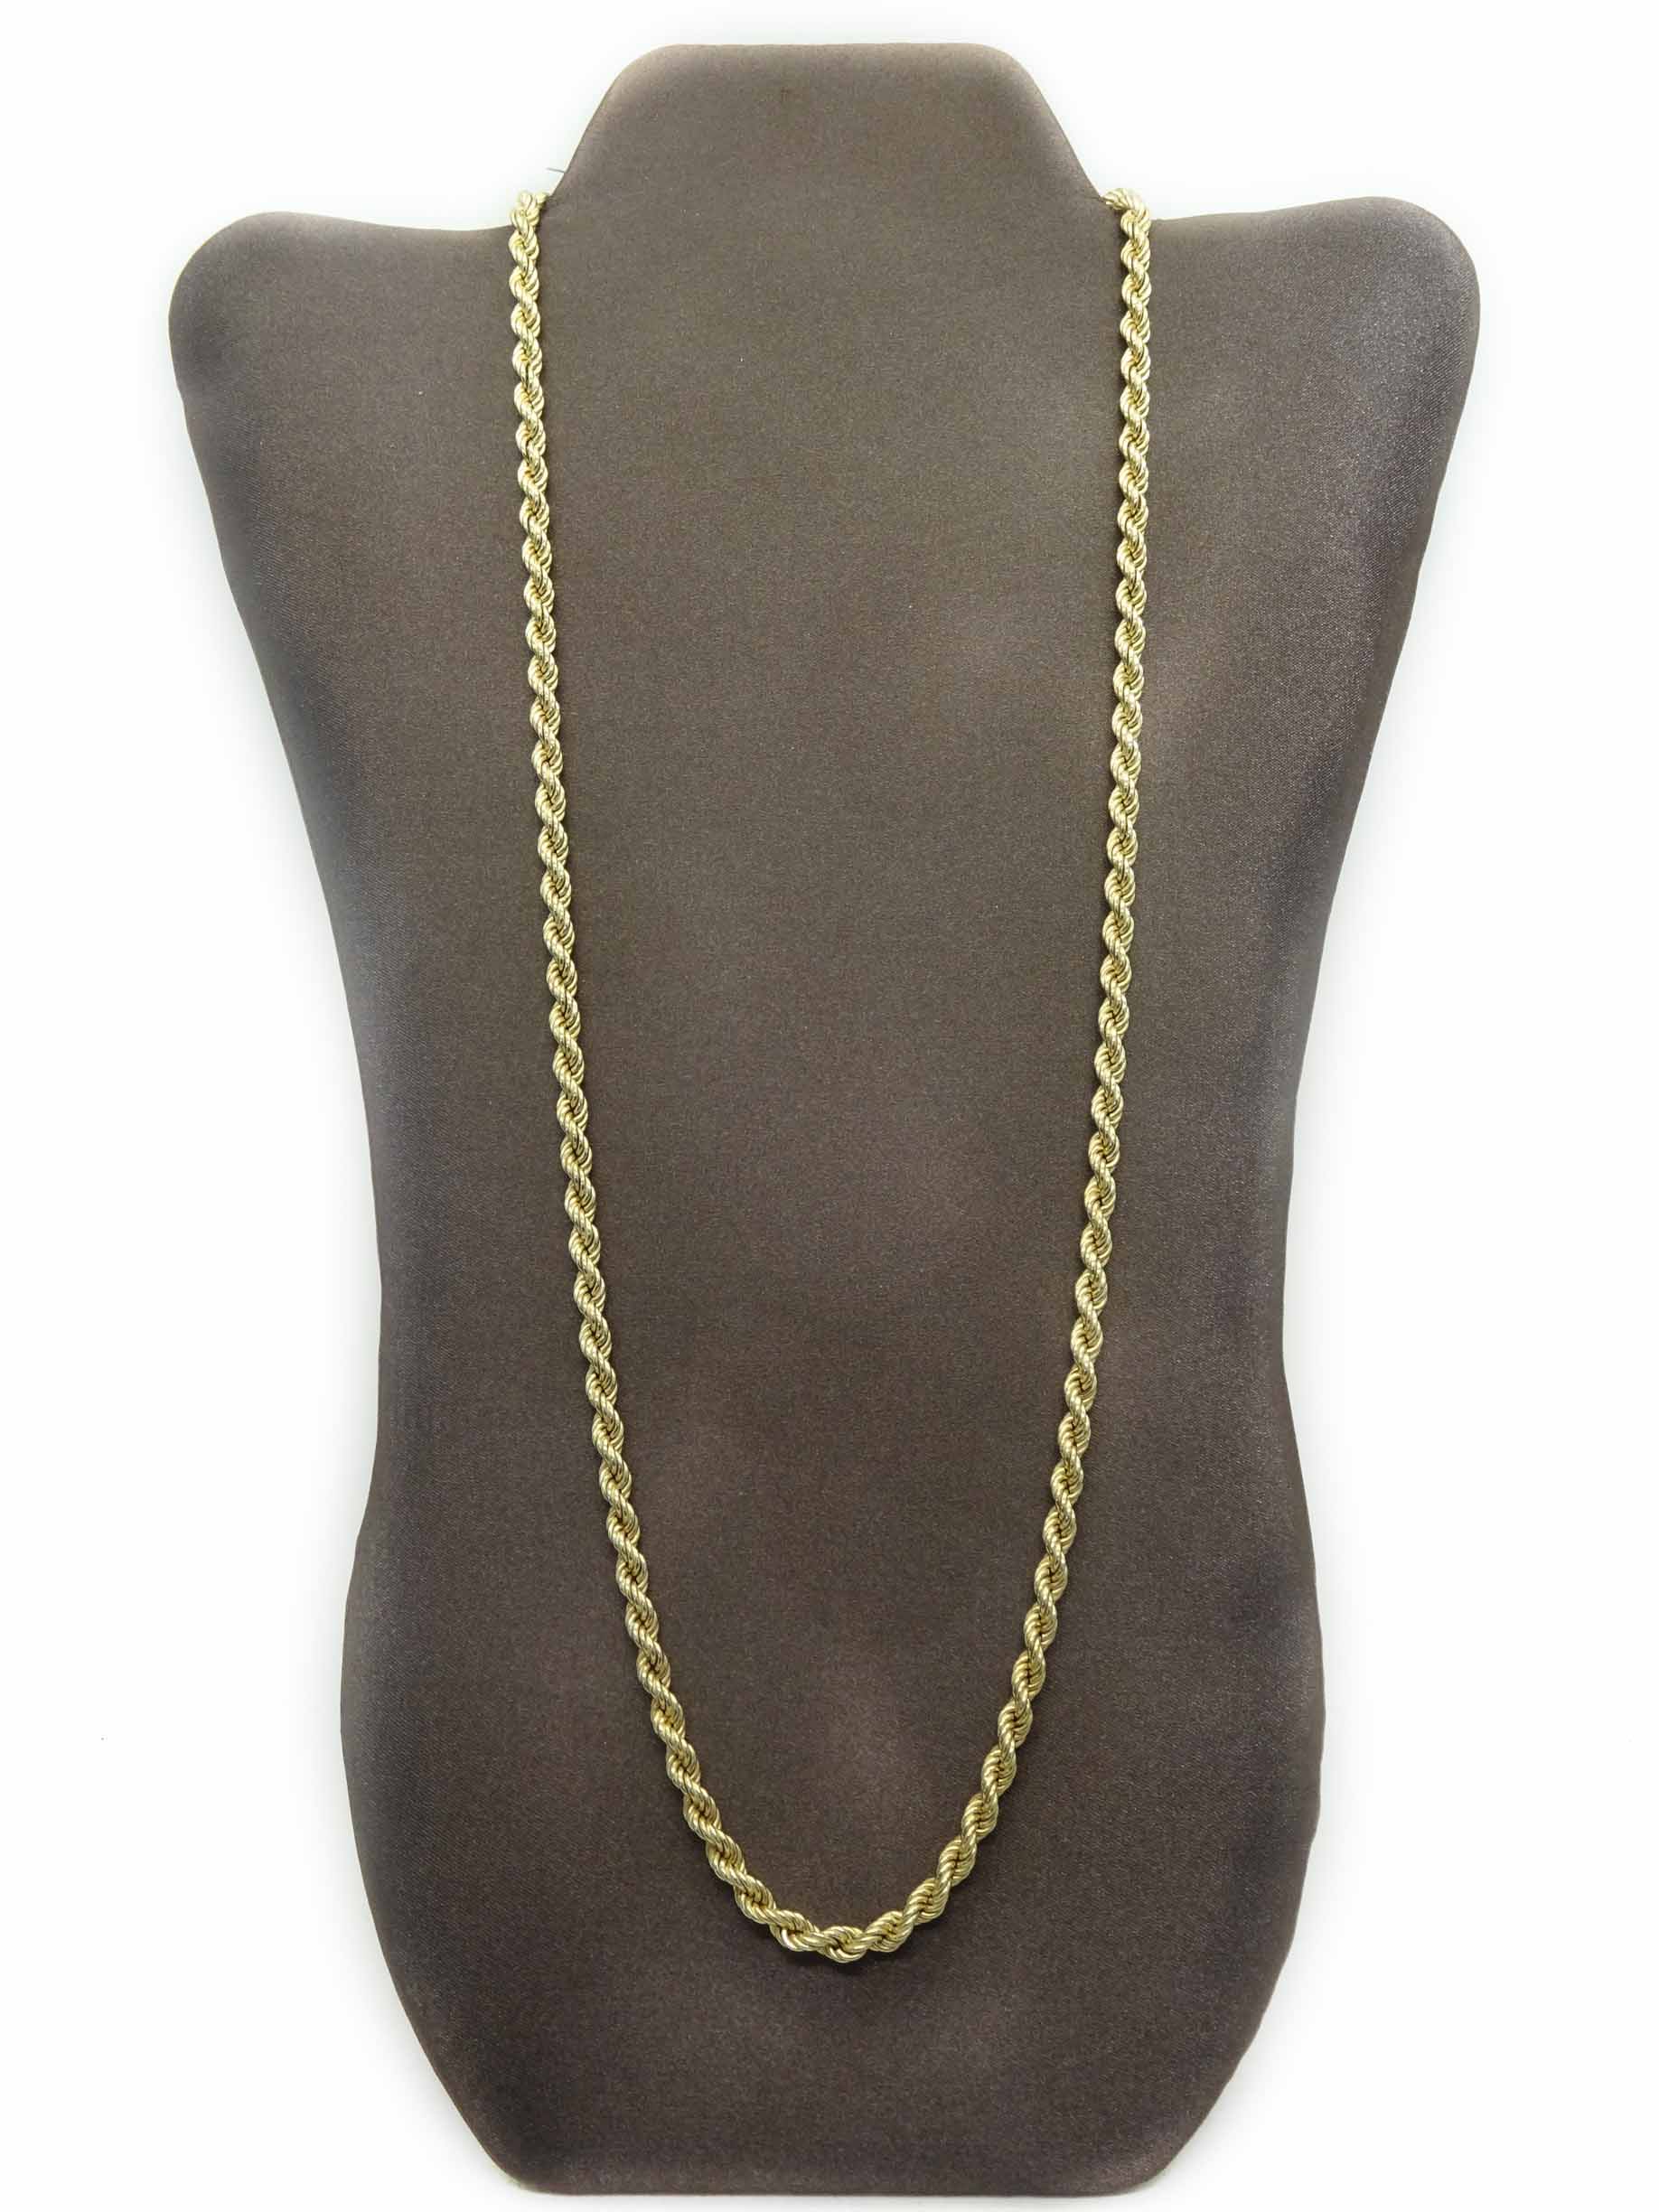 5mm Wide Rope Chain Necklace 14k Gold 28″ Long 28.4 Grams